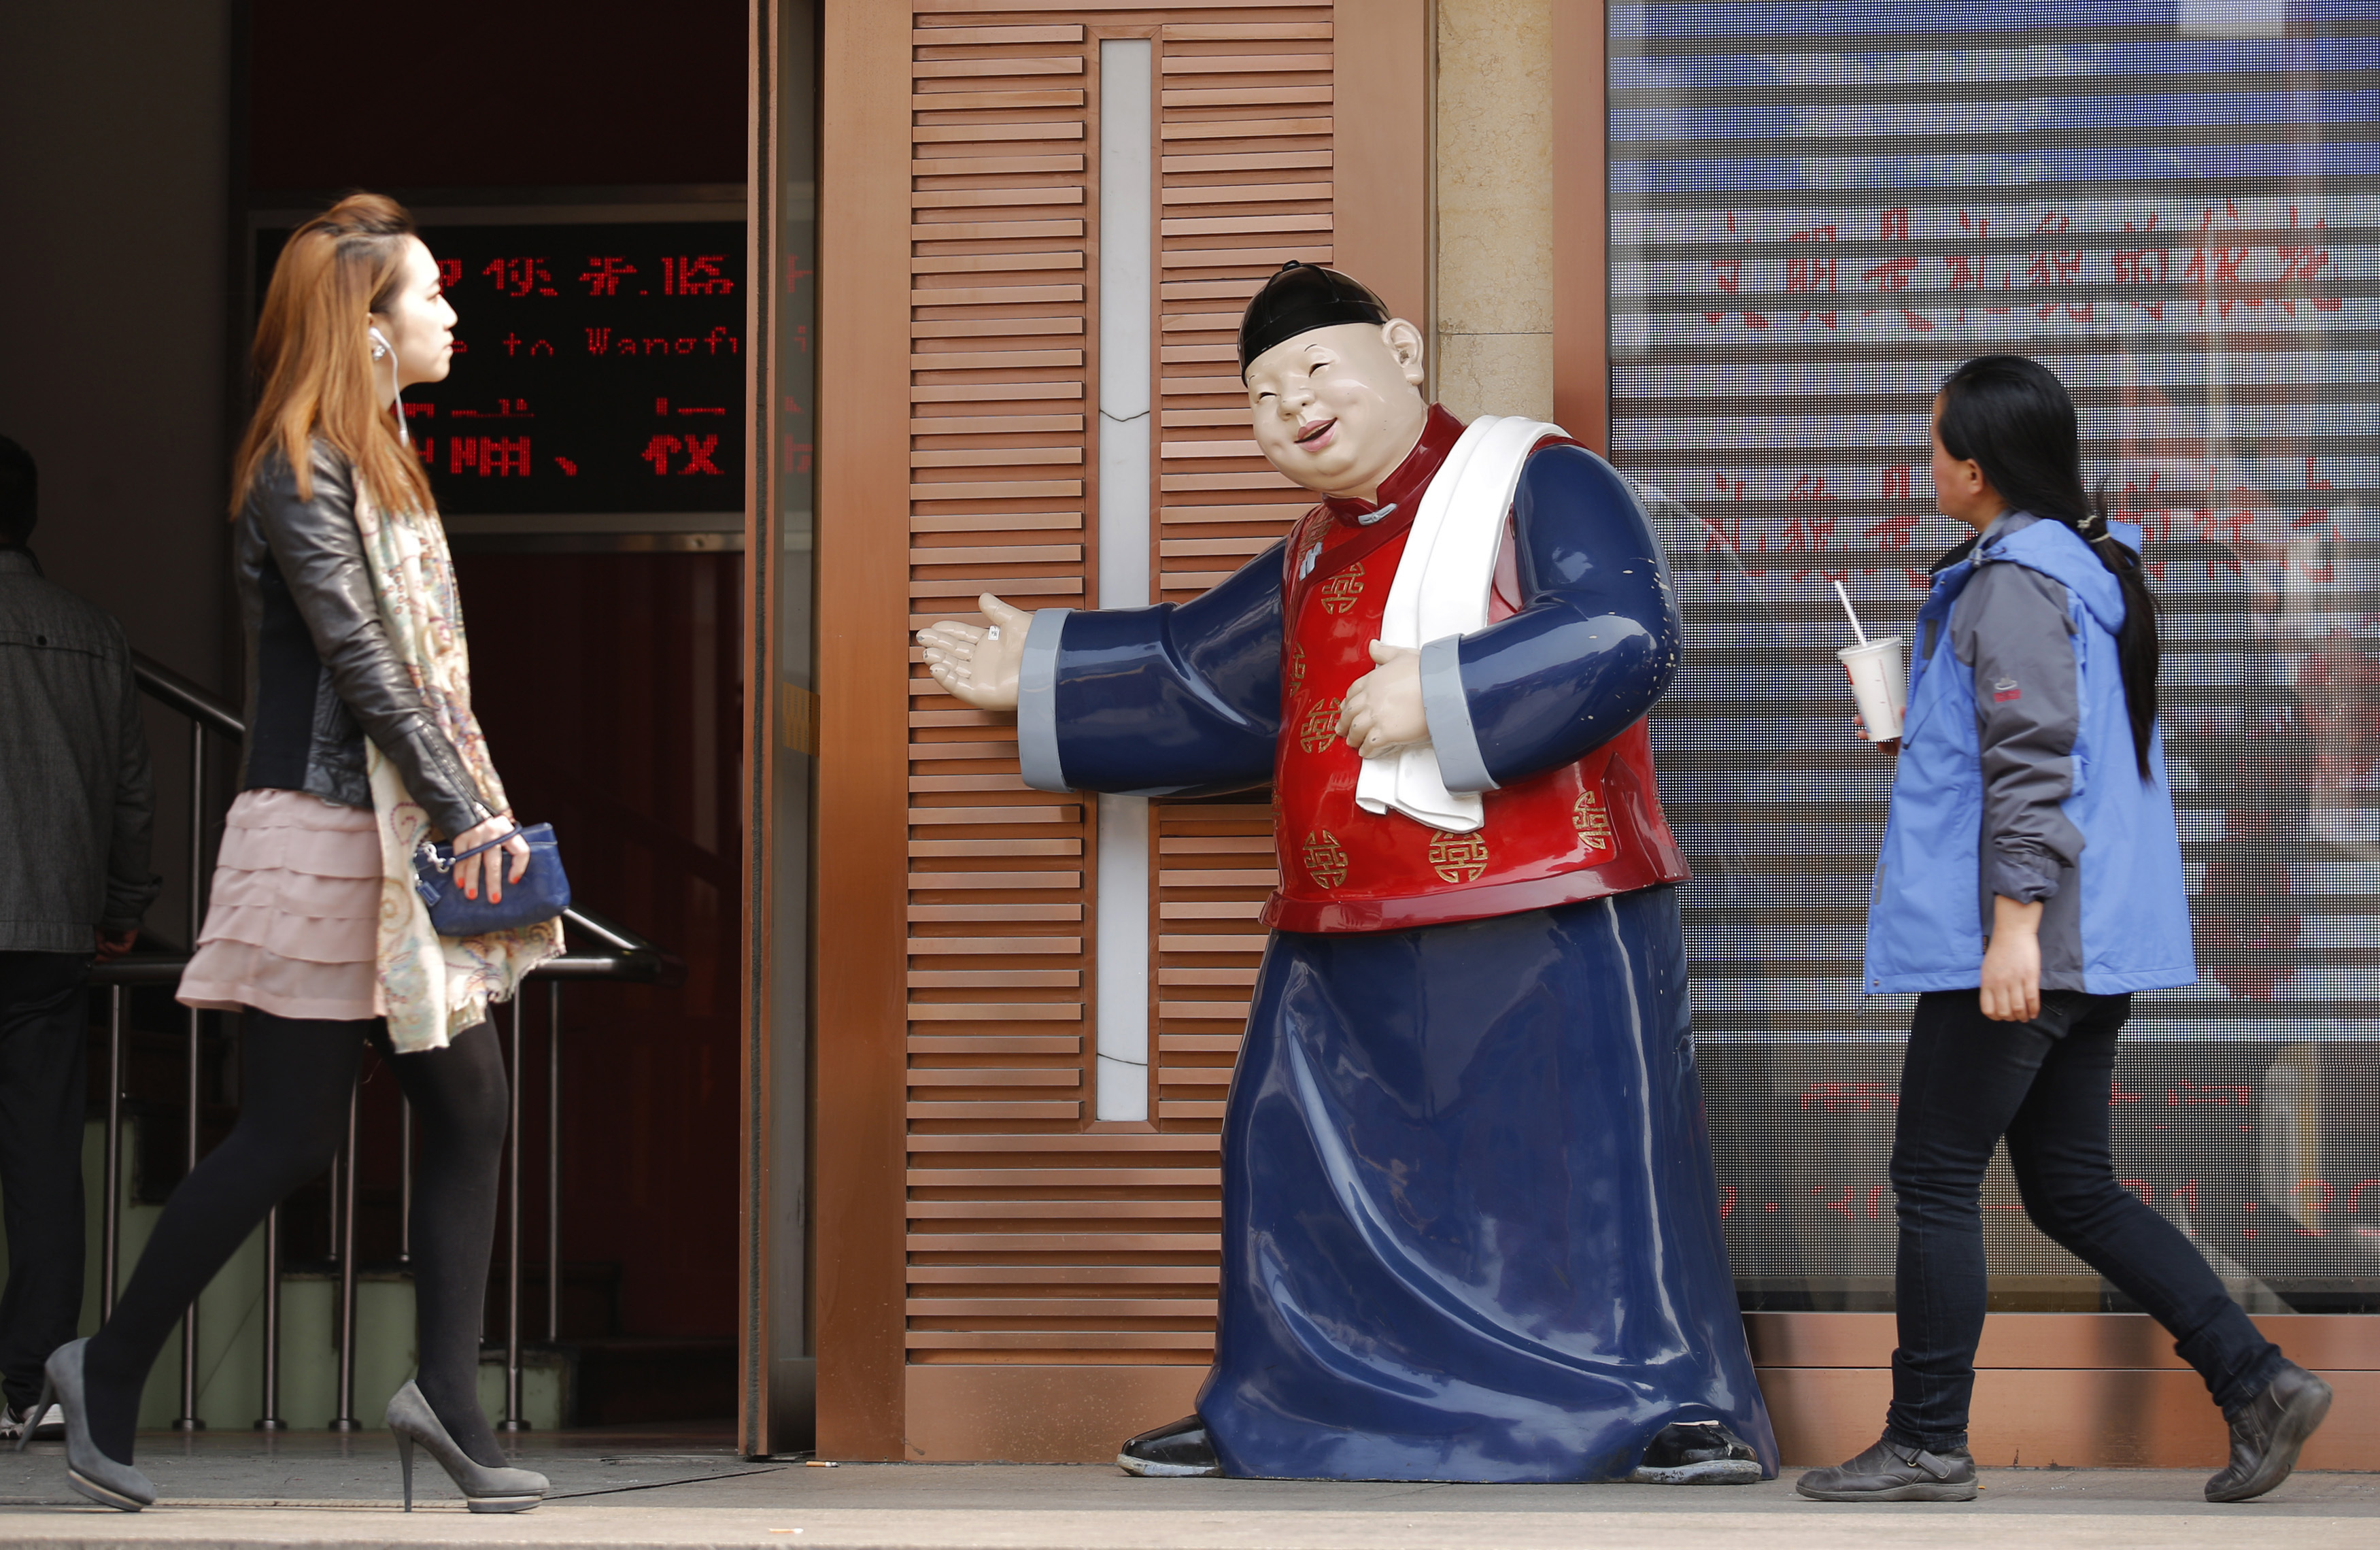 People walk past a statue, placed there to promote a restaurant, at a shopping district in Beijing